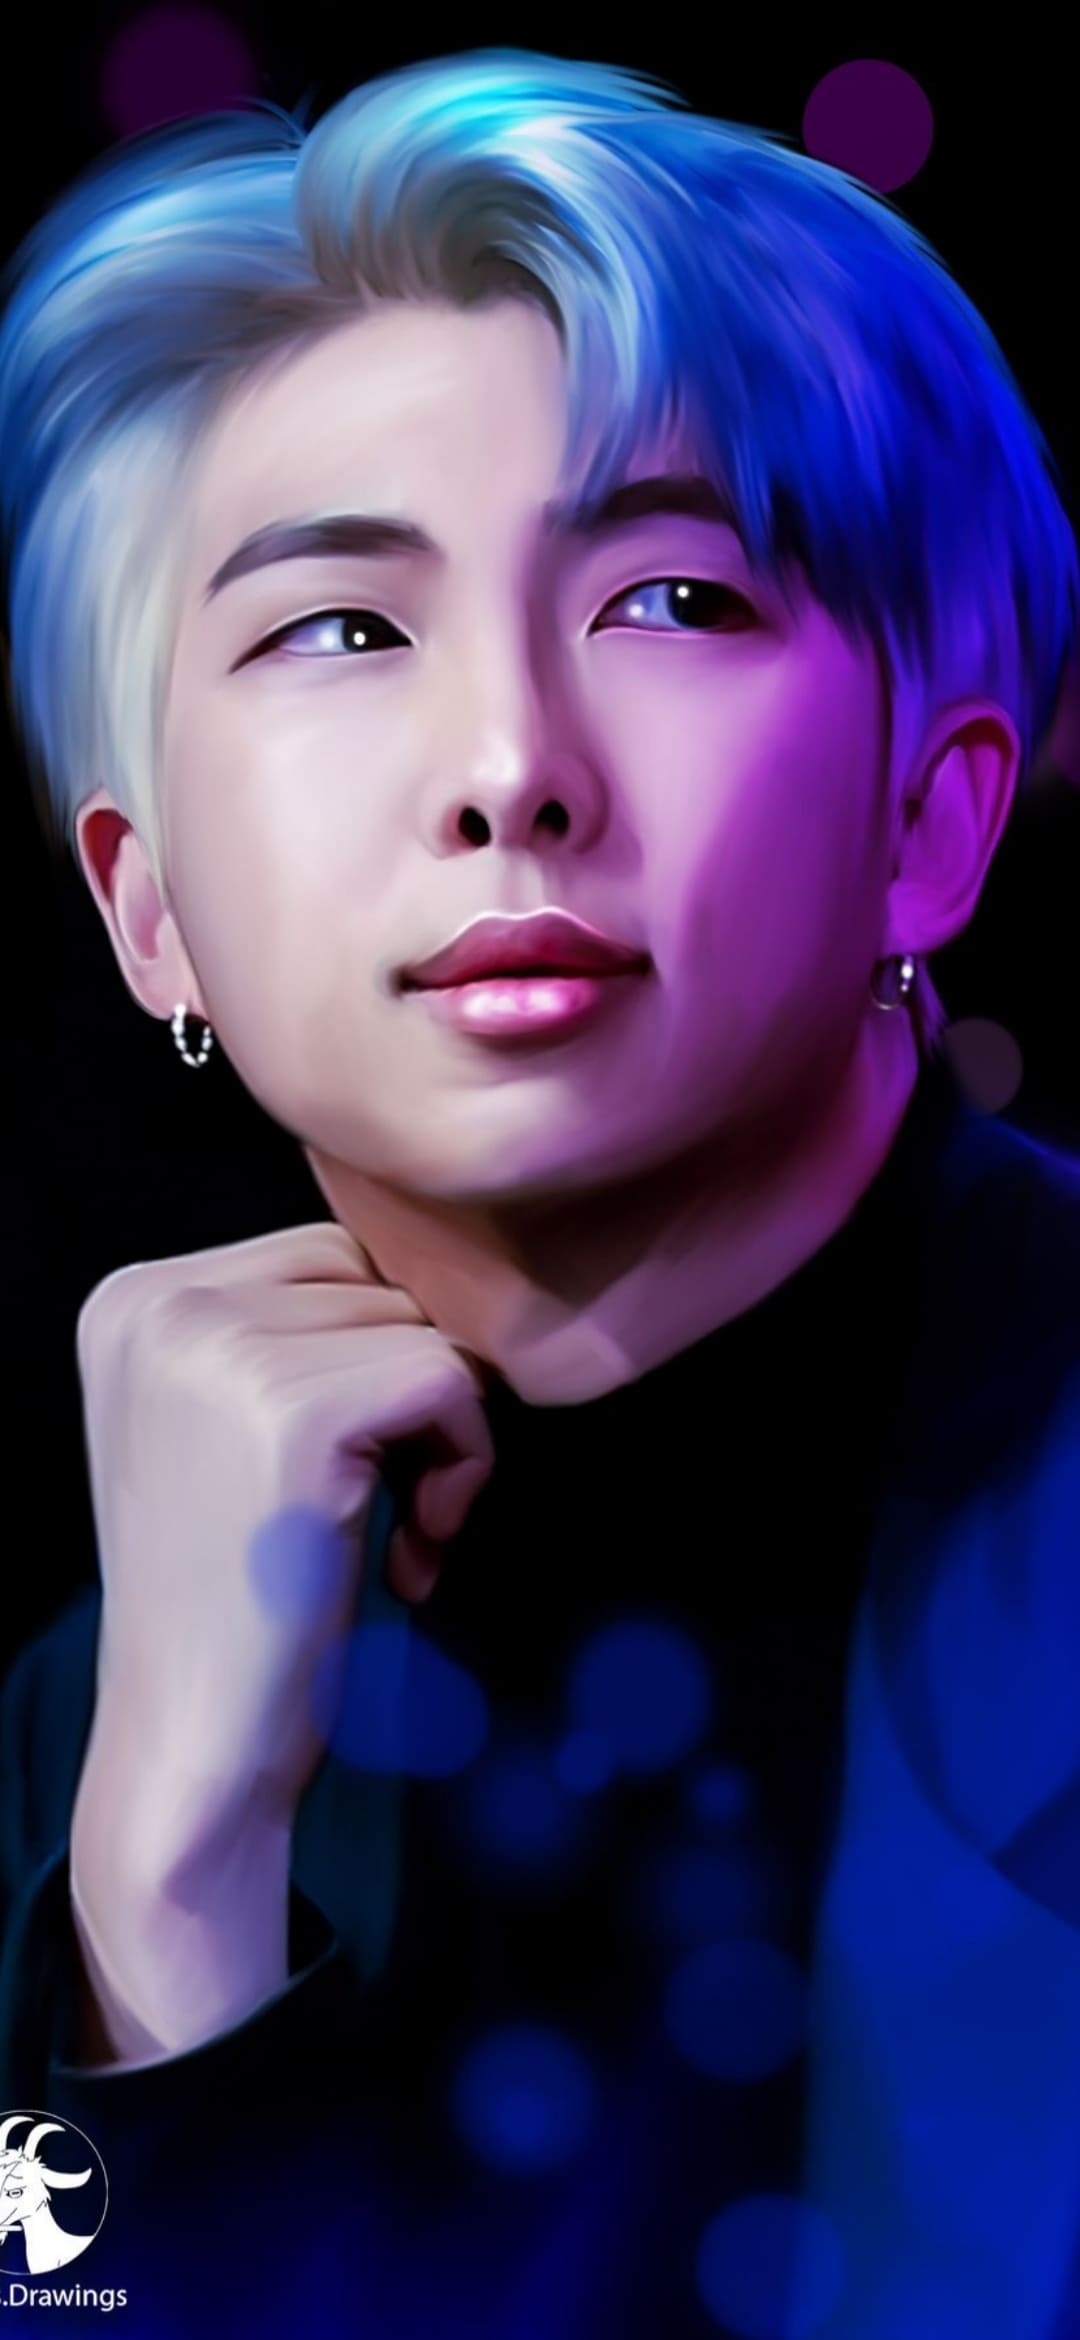 1080x2340 Bts Rm Wallpaper Download Free Hd Wallpaper Of Rm From Bts